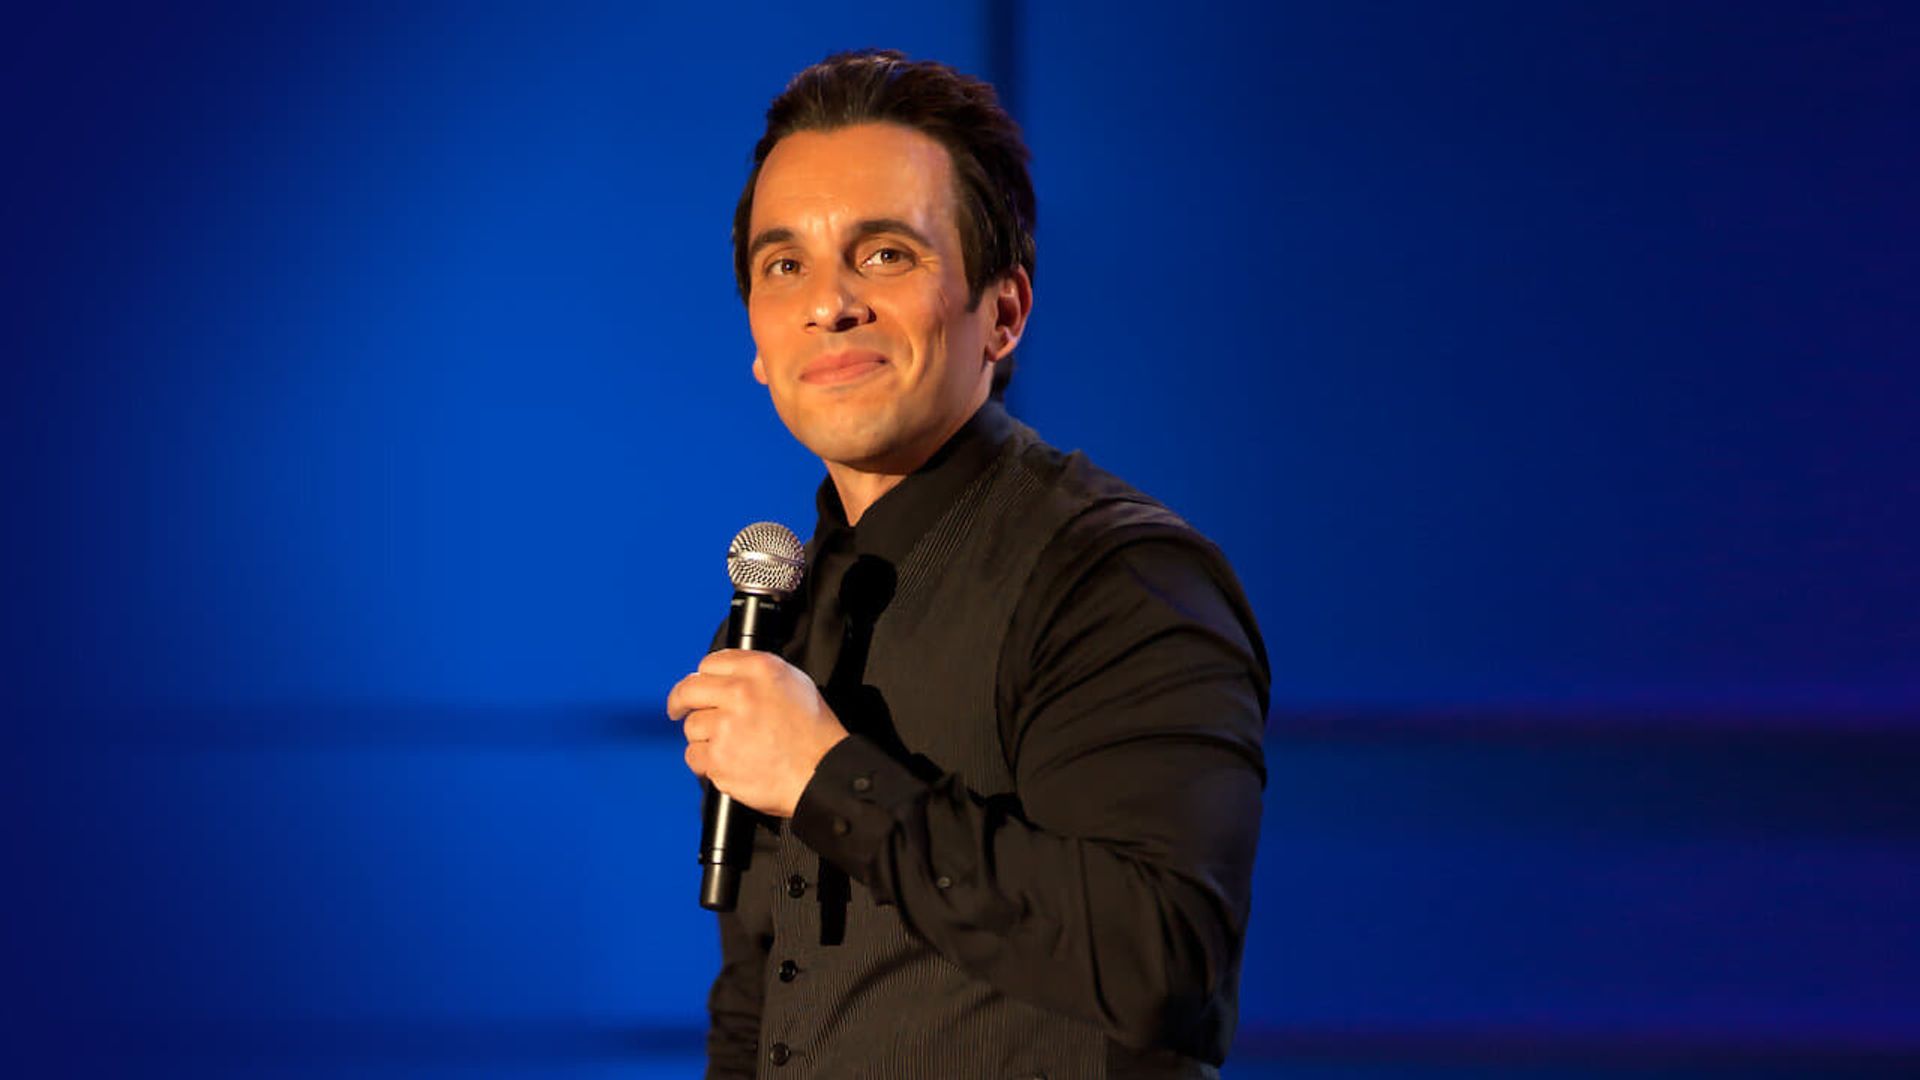 Sebastian Maniscalco: What's Wrong with People? background